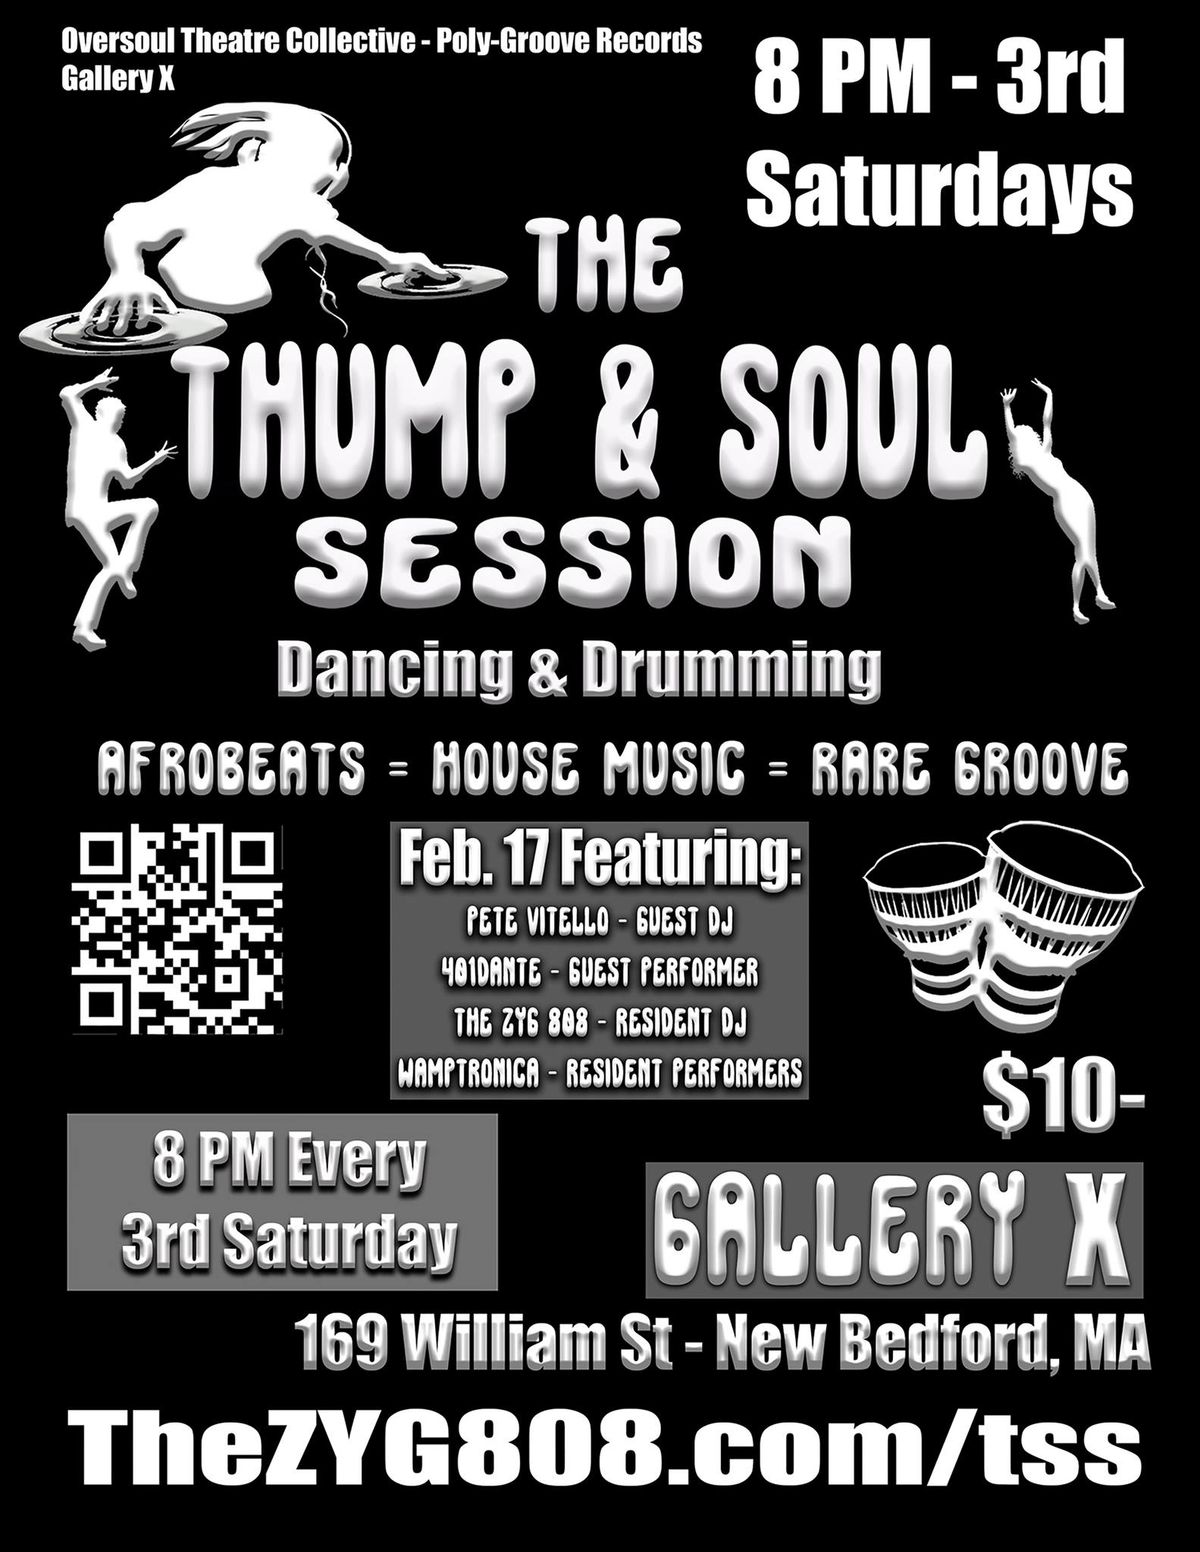 The THUMP & SOUL SESSION